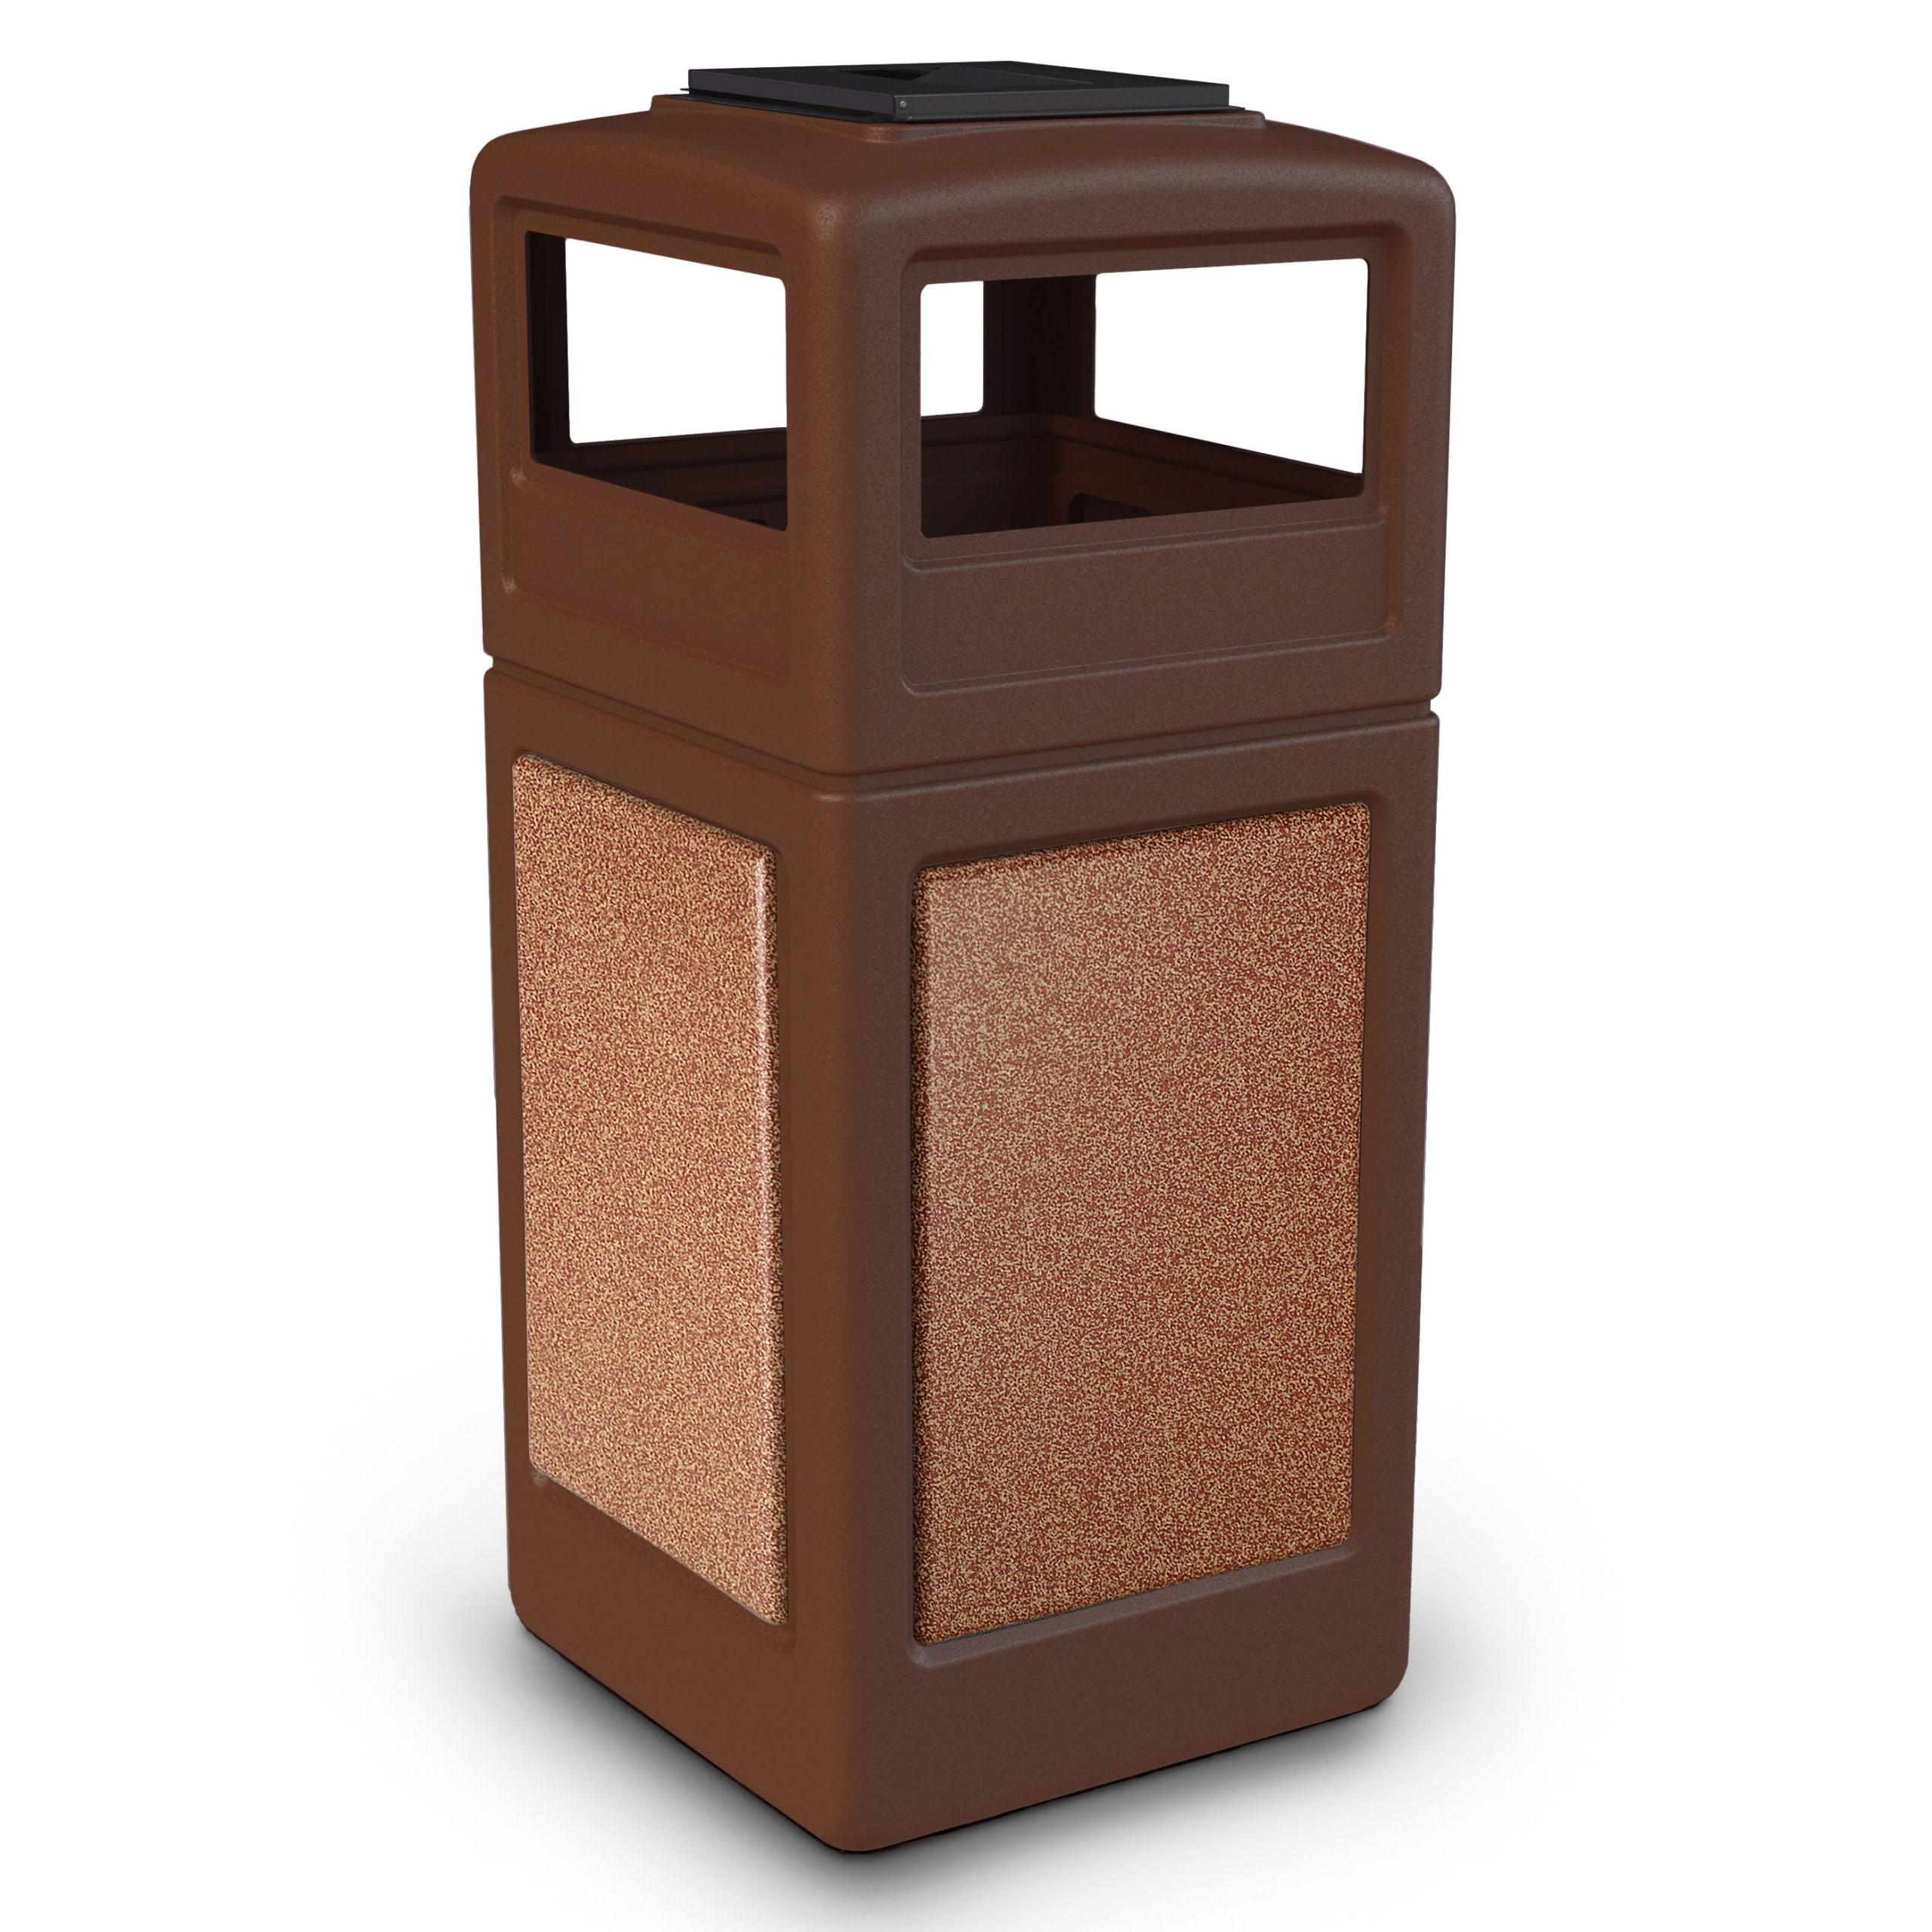 https://www.commercialzone.com/wp-content/uploads/2022/09/720525K-StoneTec-Series-42-Gallon-Square-Waste-Receptacle-with-Ashtray-Dome-Lid-Brown-Sedona-scaled-1.jpg